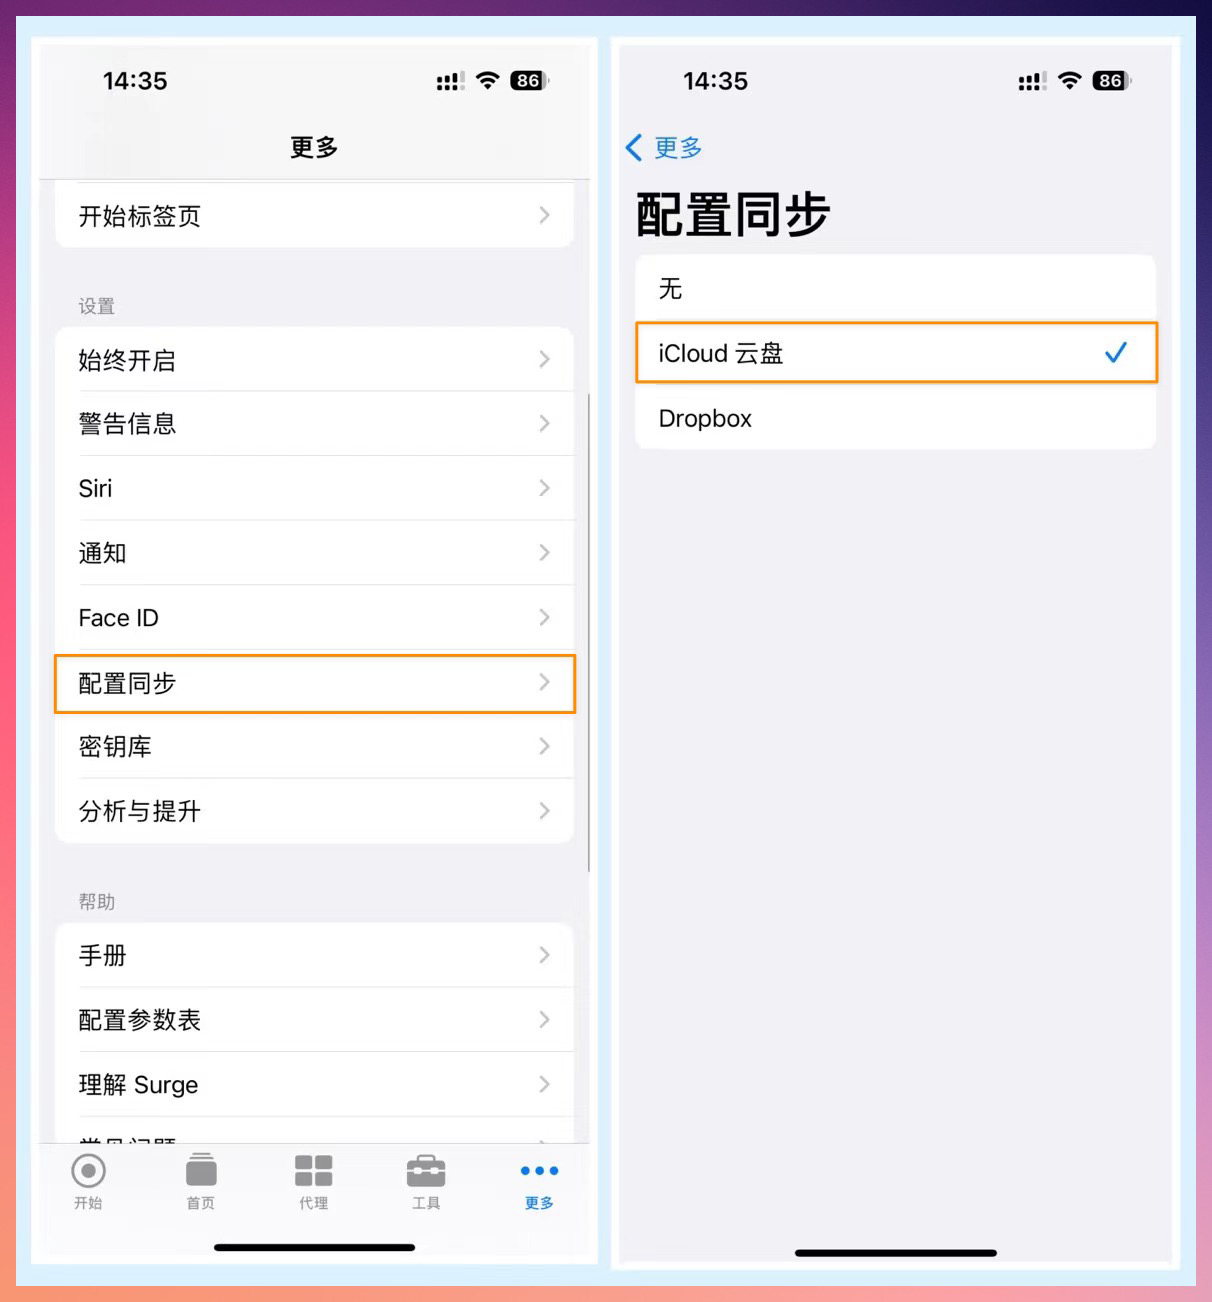 https://i.yaoyao.io/blog/surge-for-ios-profile-sync.png